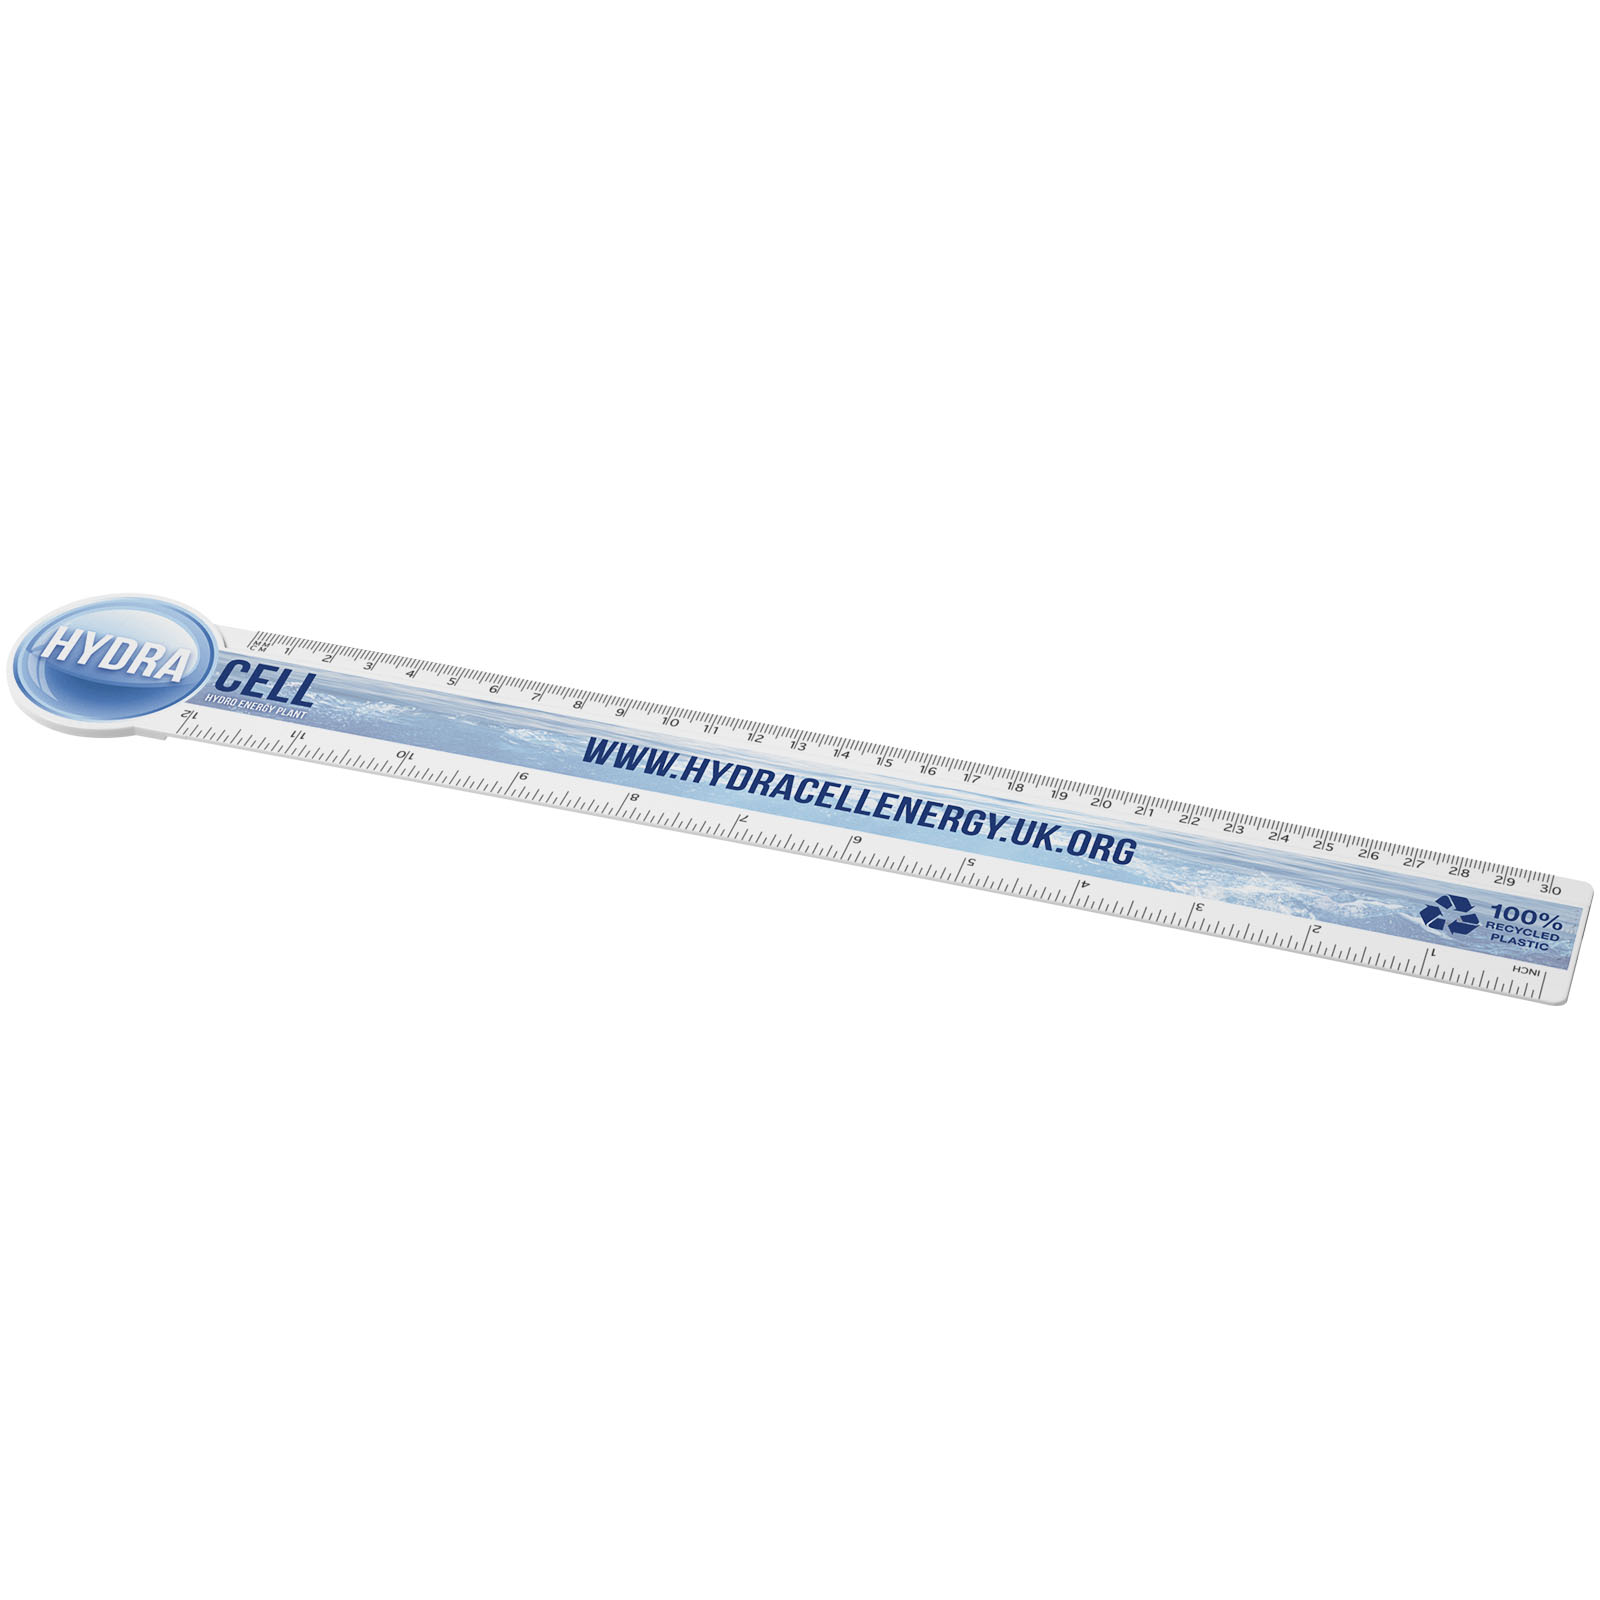 Desk Accessories - Tait 30cm circle-shaped recycled plastic ruler